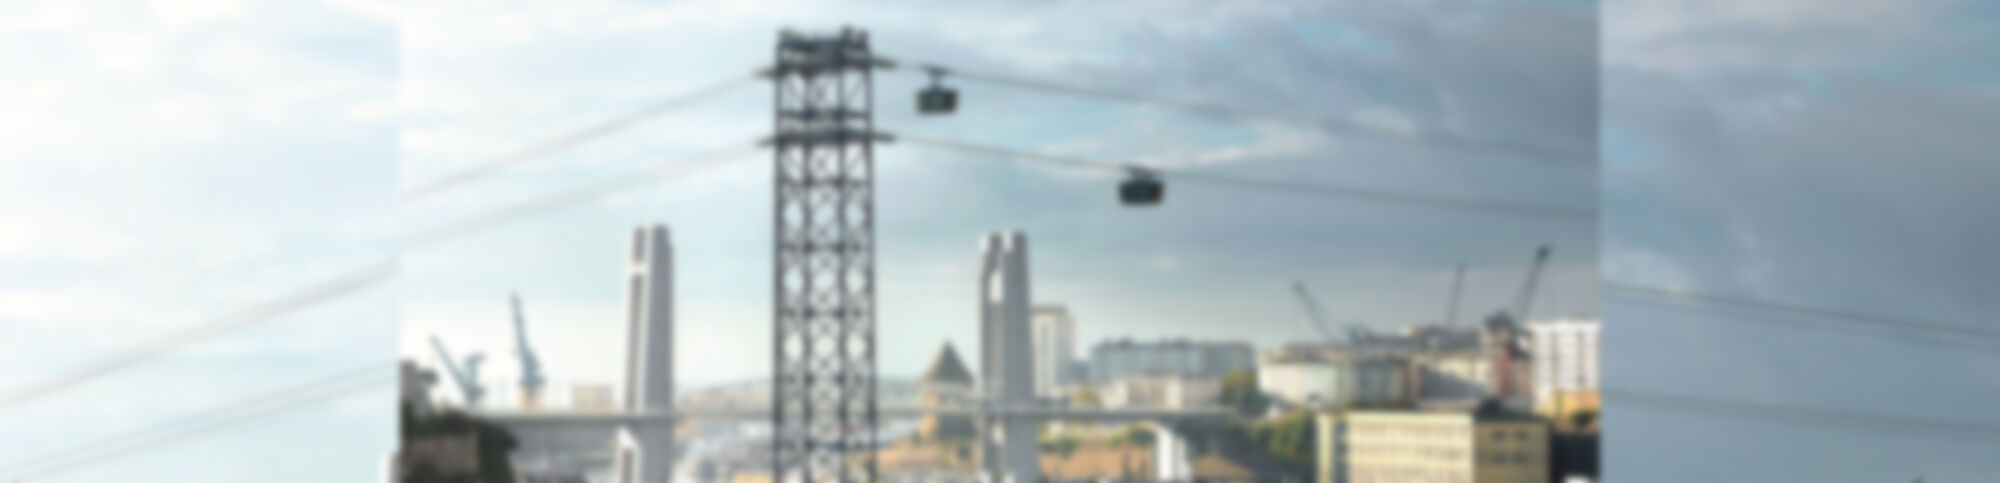 CABLE CAR WORLD: 
		CCW_Brest_Slider
	